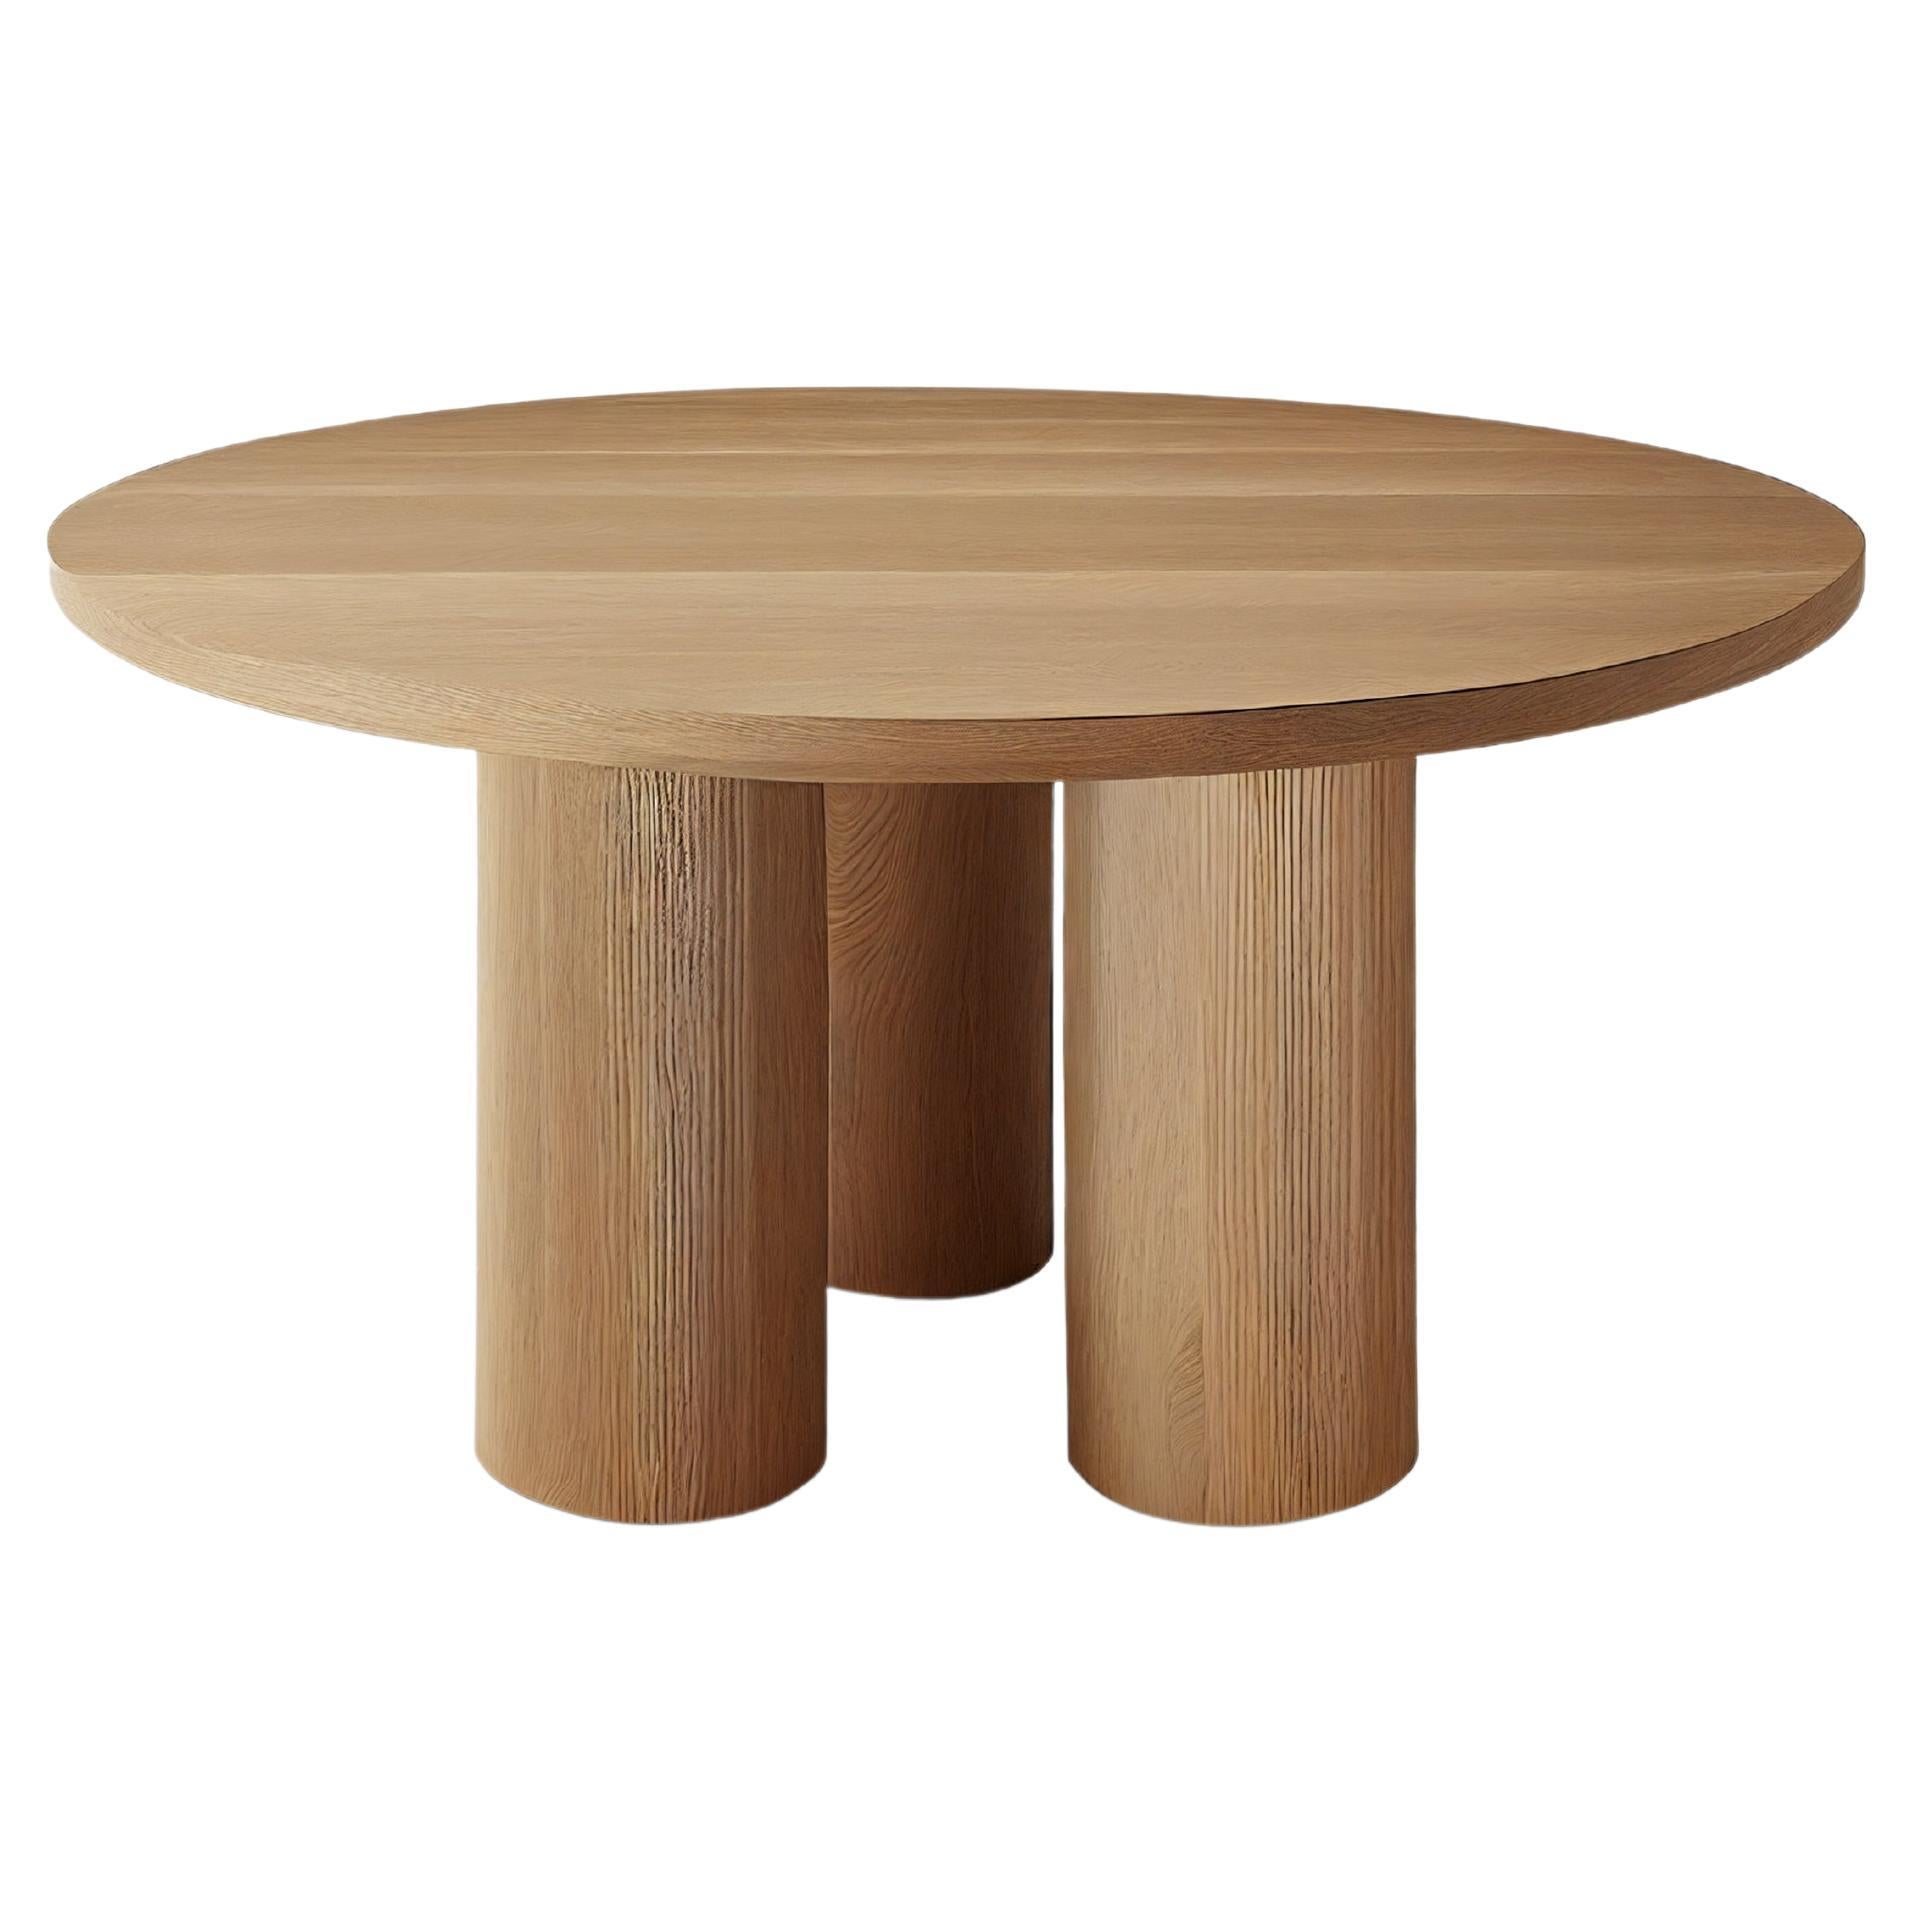 Brutalist Round Dining Table in Wood Veneer, Podio by NONO